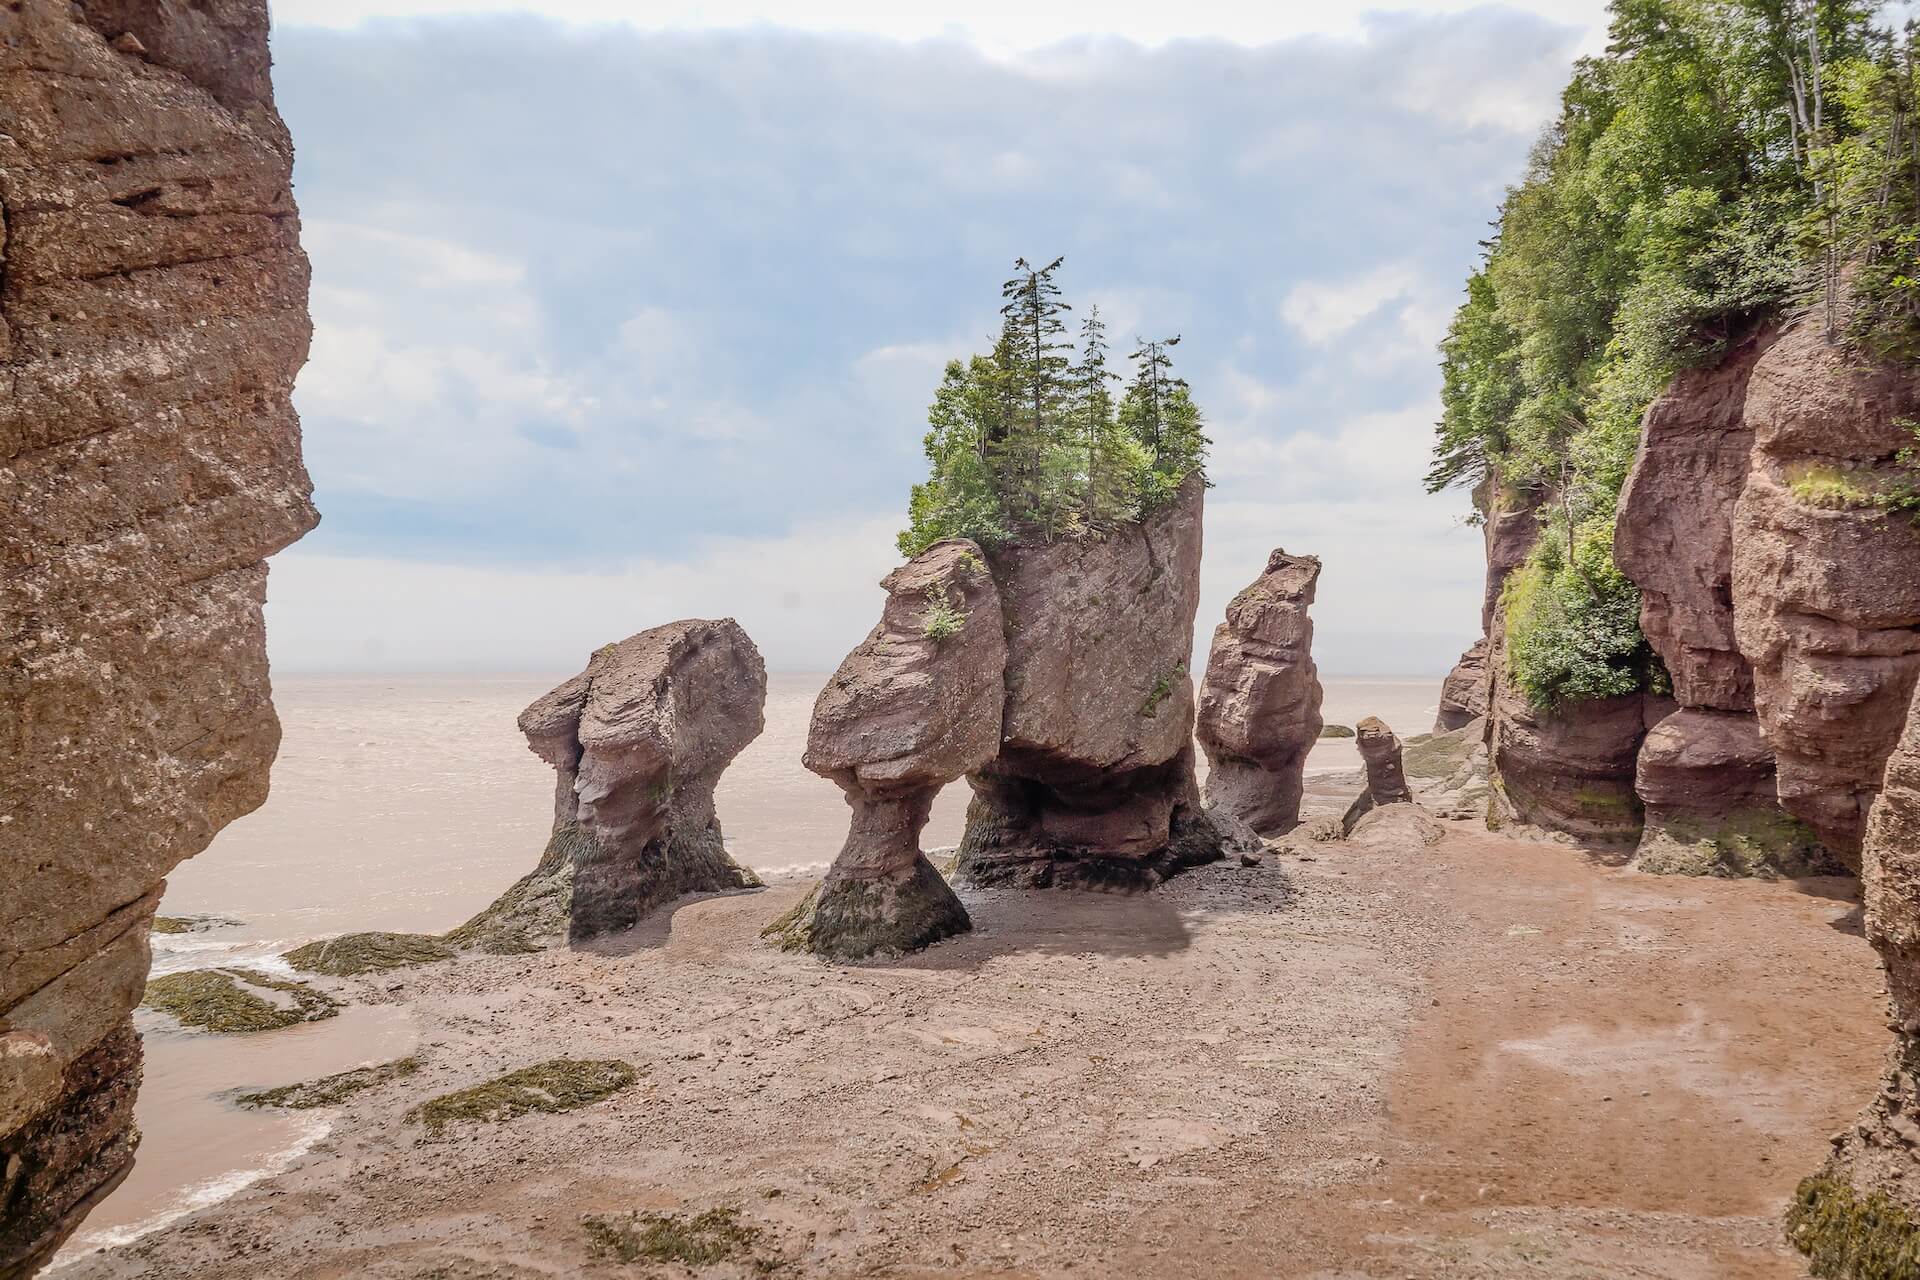 Large rock formations coming up from the water on a beach